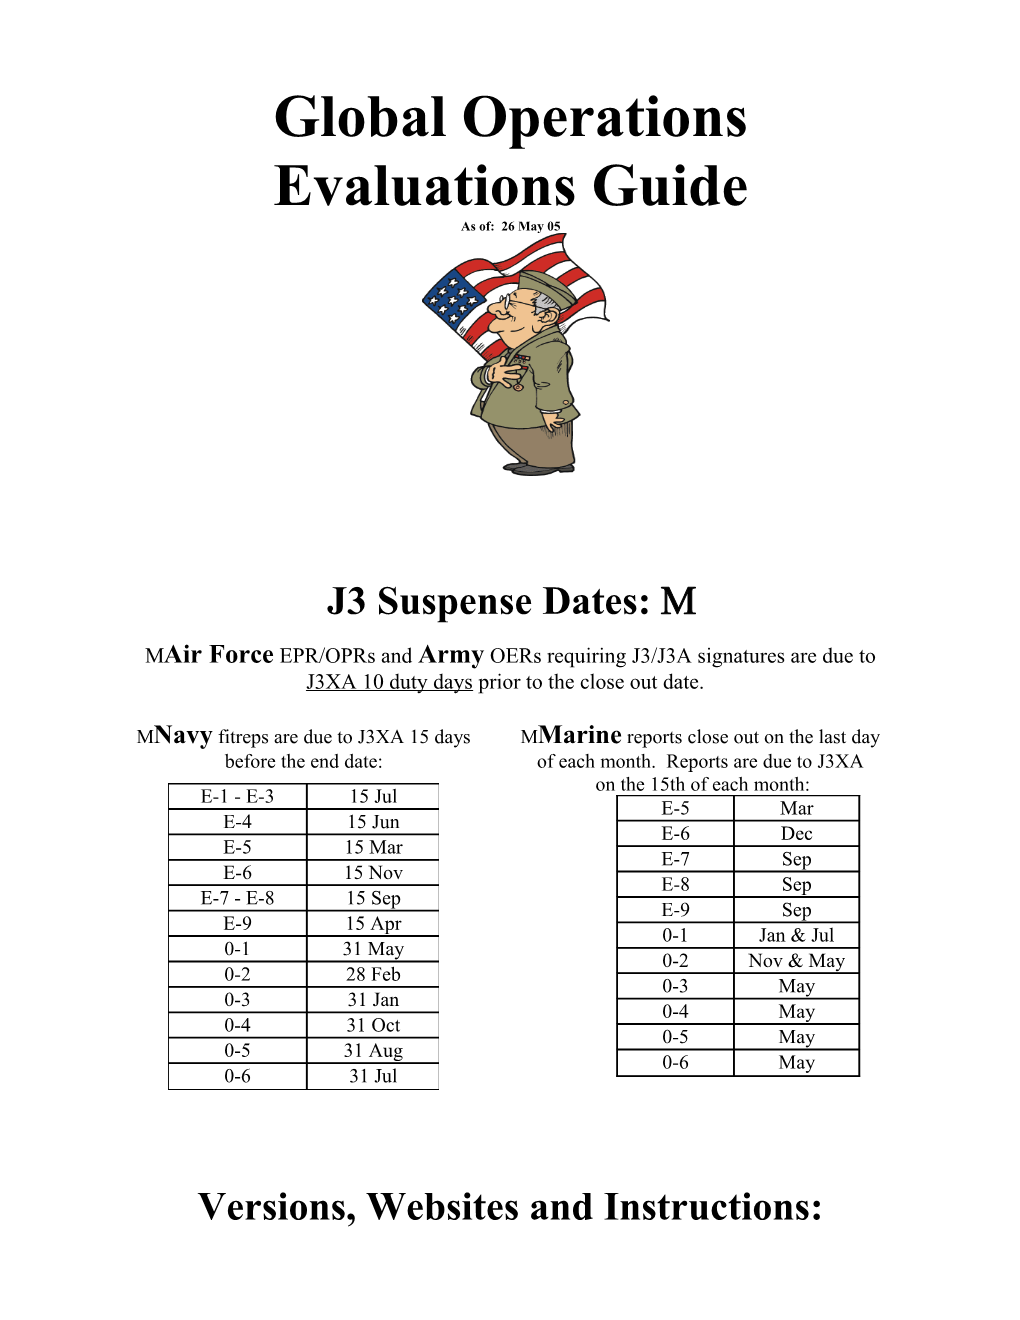 Global Operations Evaluation Guide